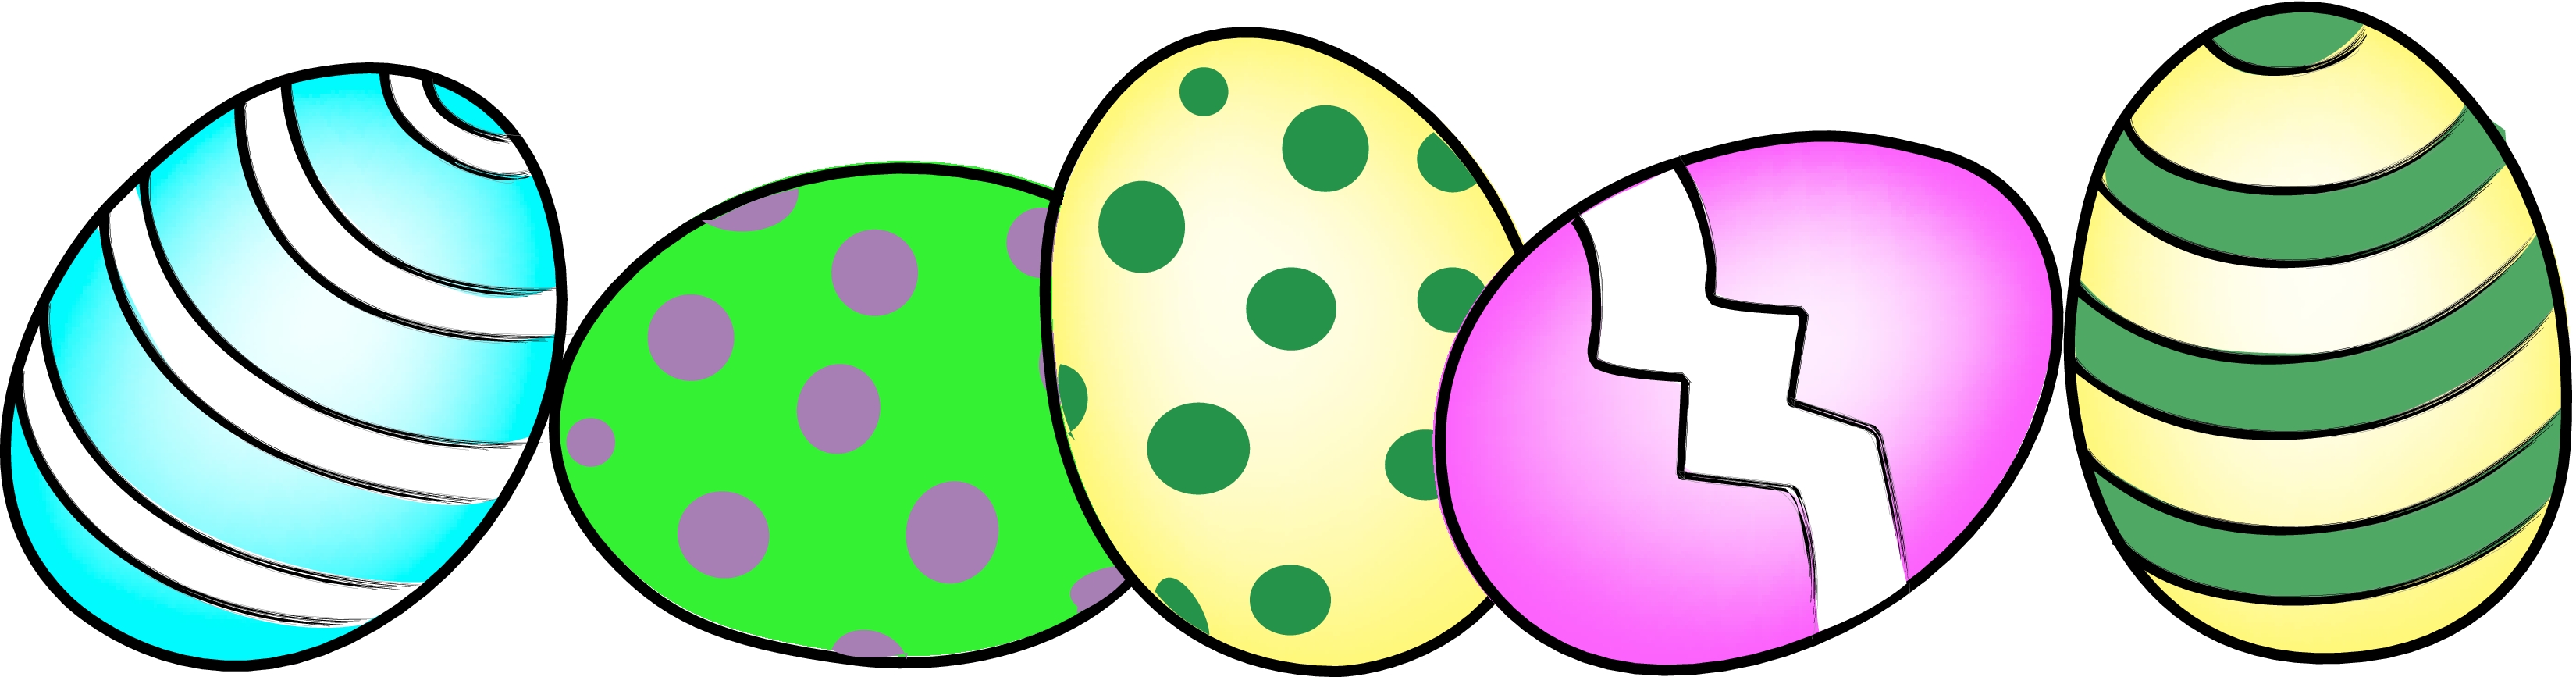 Easter Borders Free Clip Art - ClipArt Best